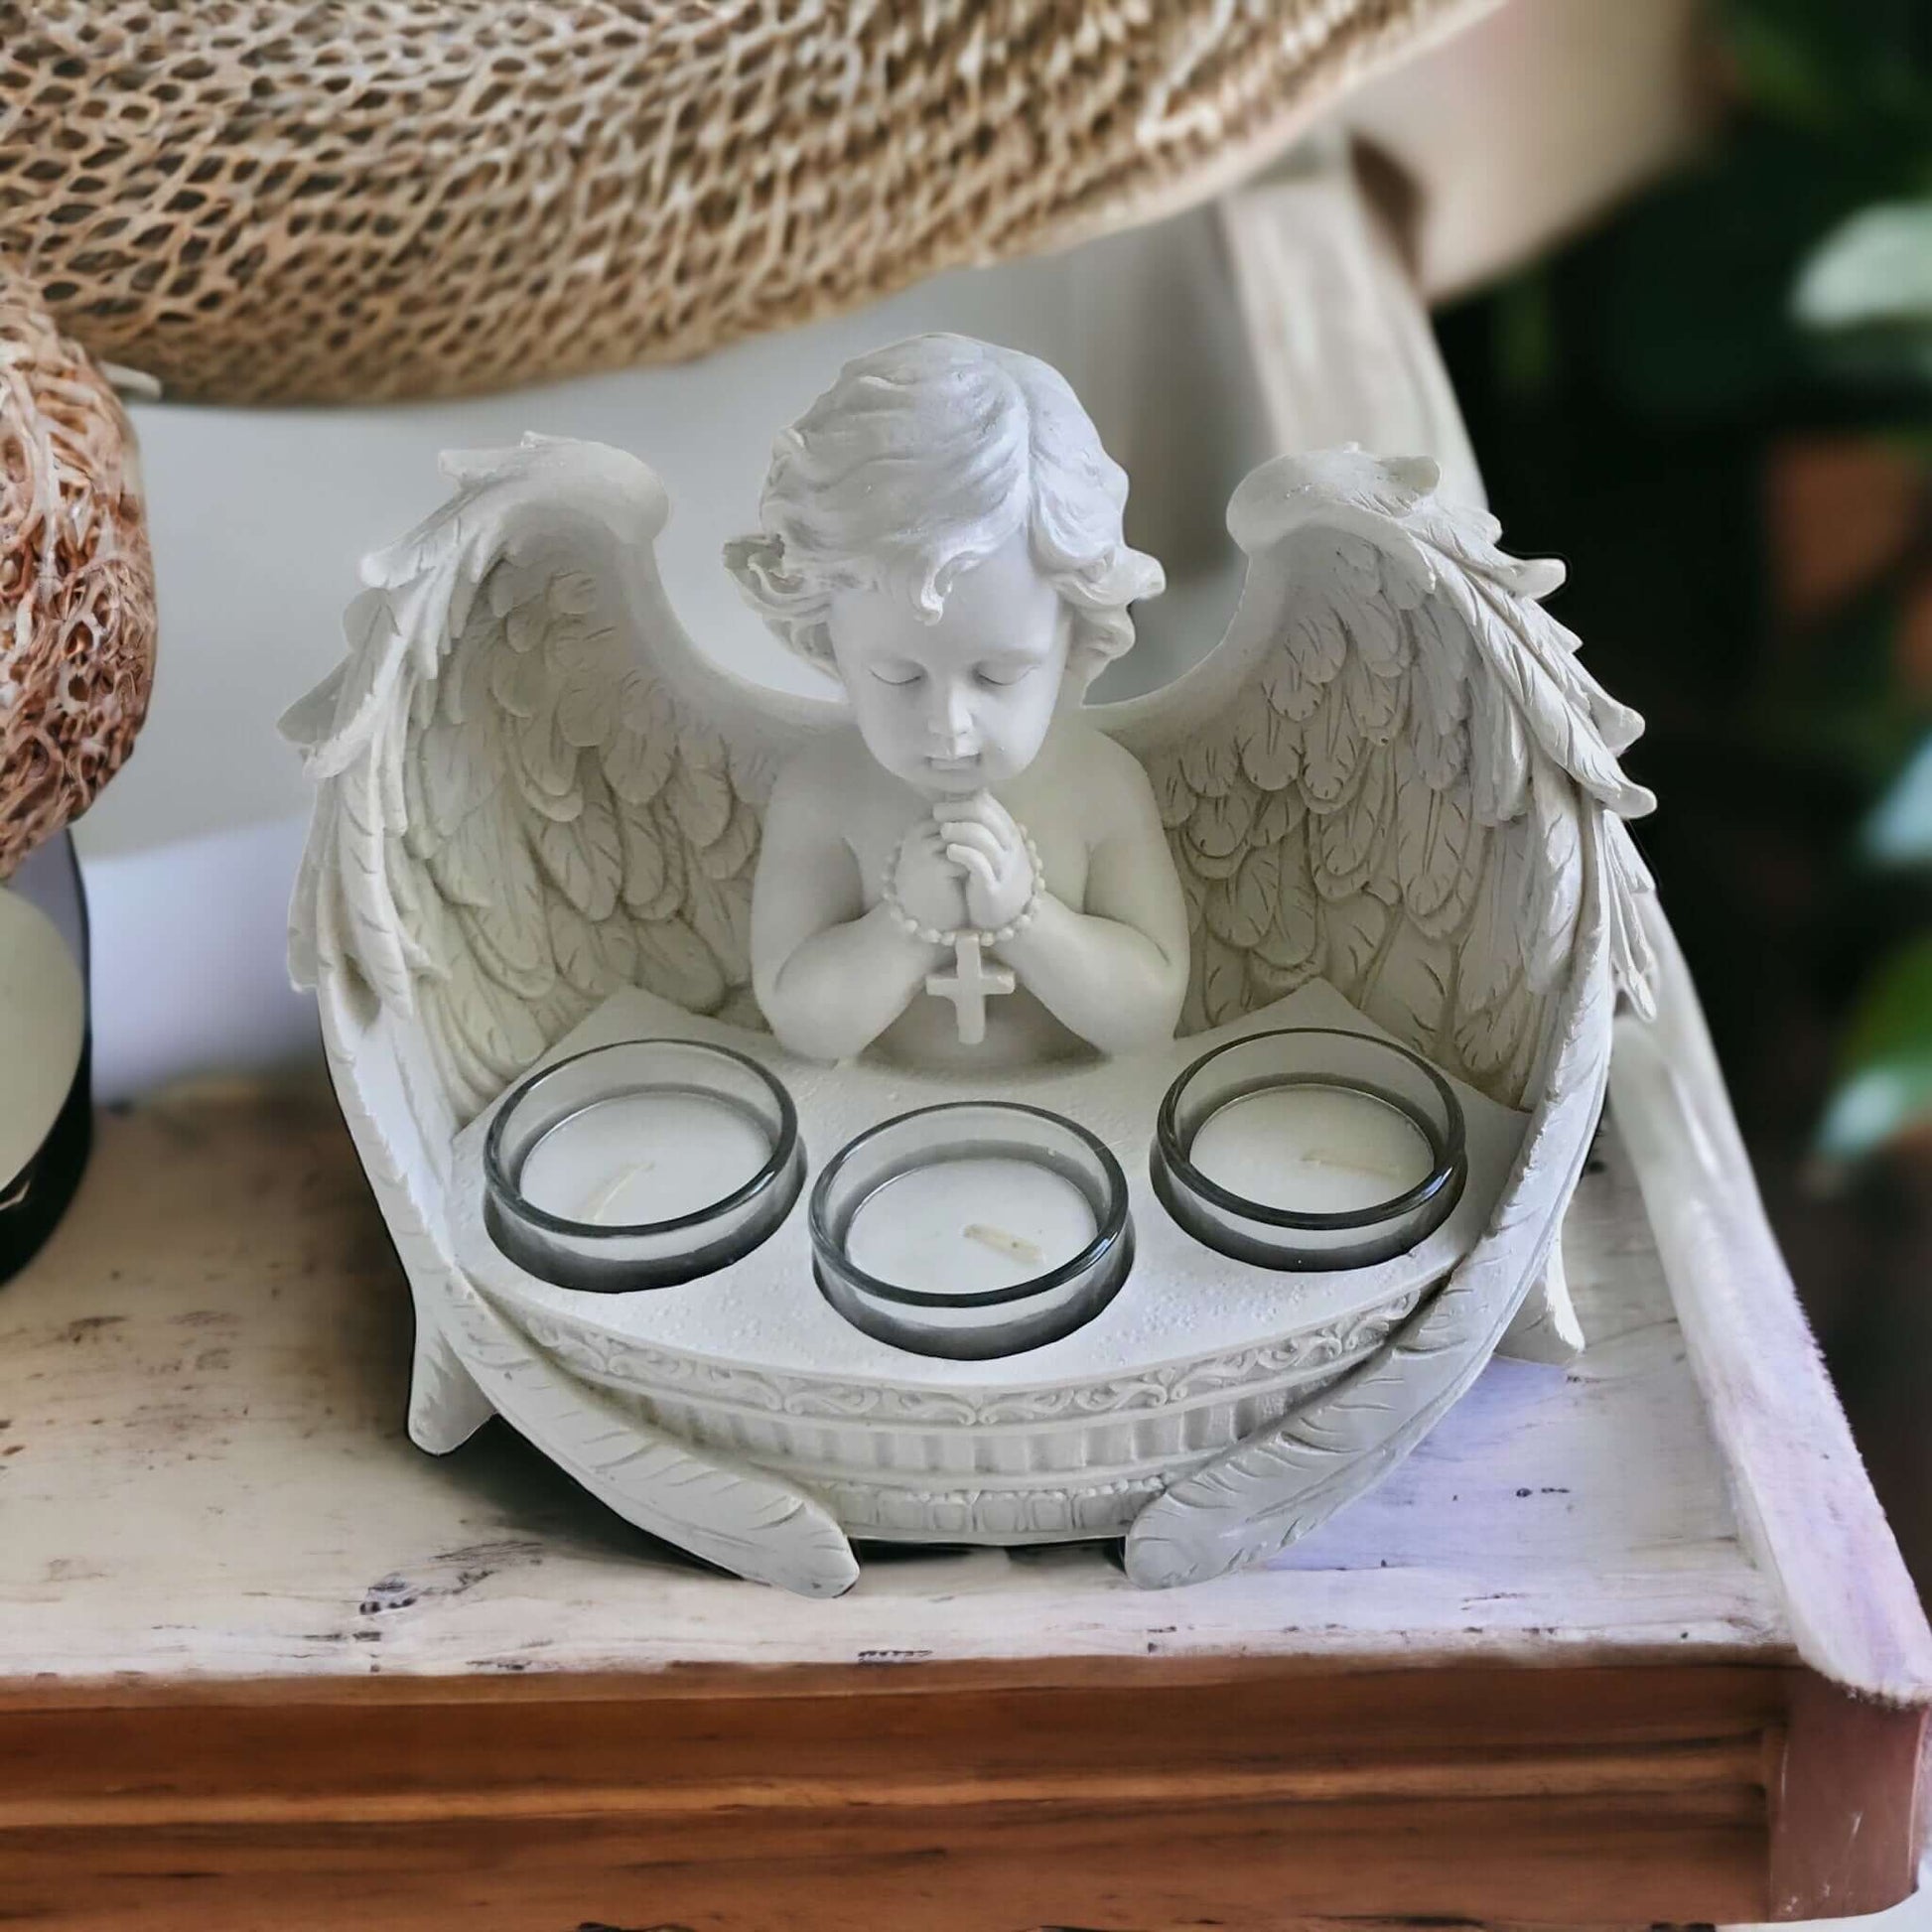 Angel Cherub Candle with Tealights - The Renmy Store Homewares & Gifts 